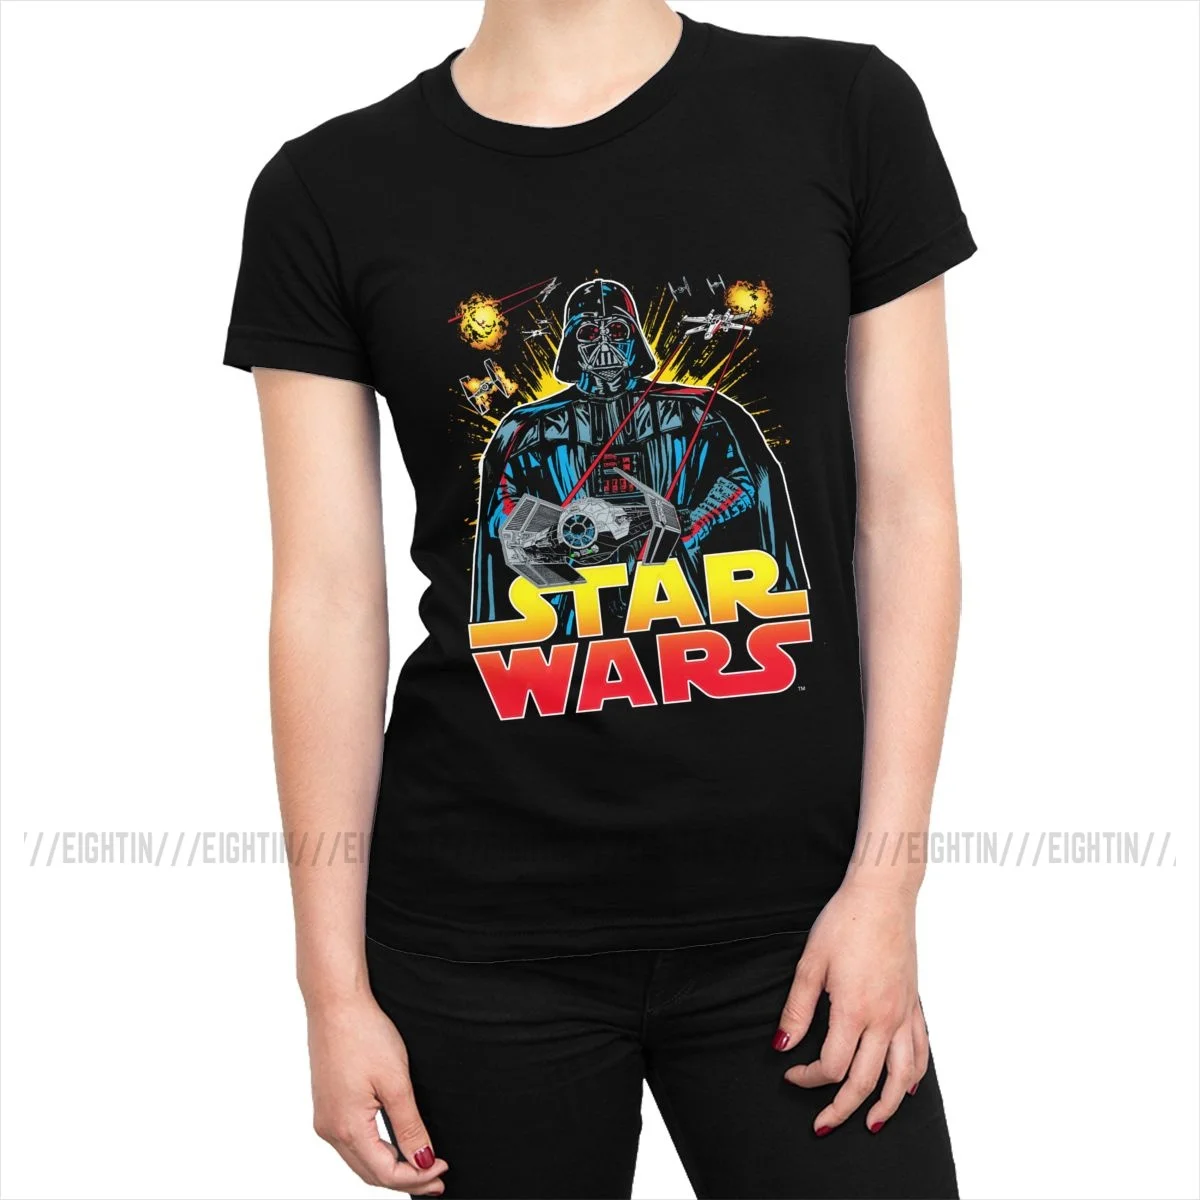 

Empire Falling Star Wars T-shirts for Women T Shirt Fashion Tees Top Humor Crew Neck Cotton Short Sleeve Female Clothing Graphic